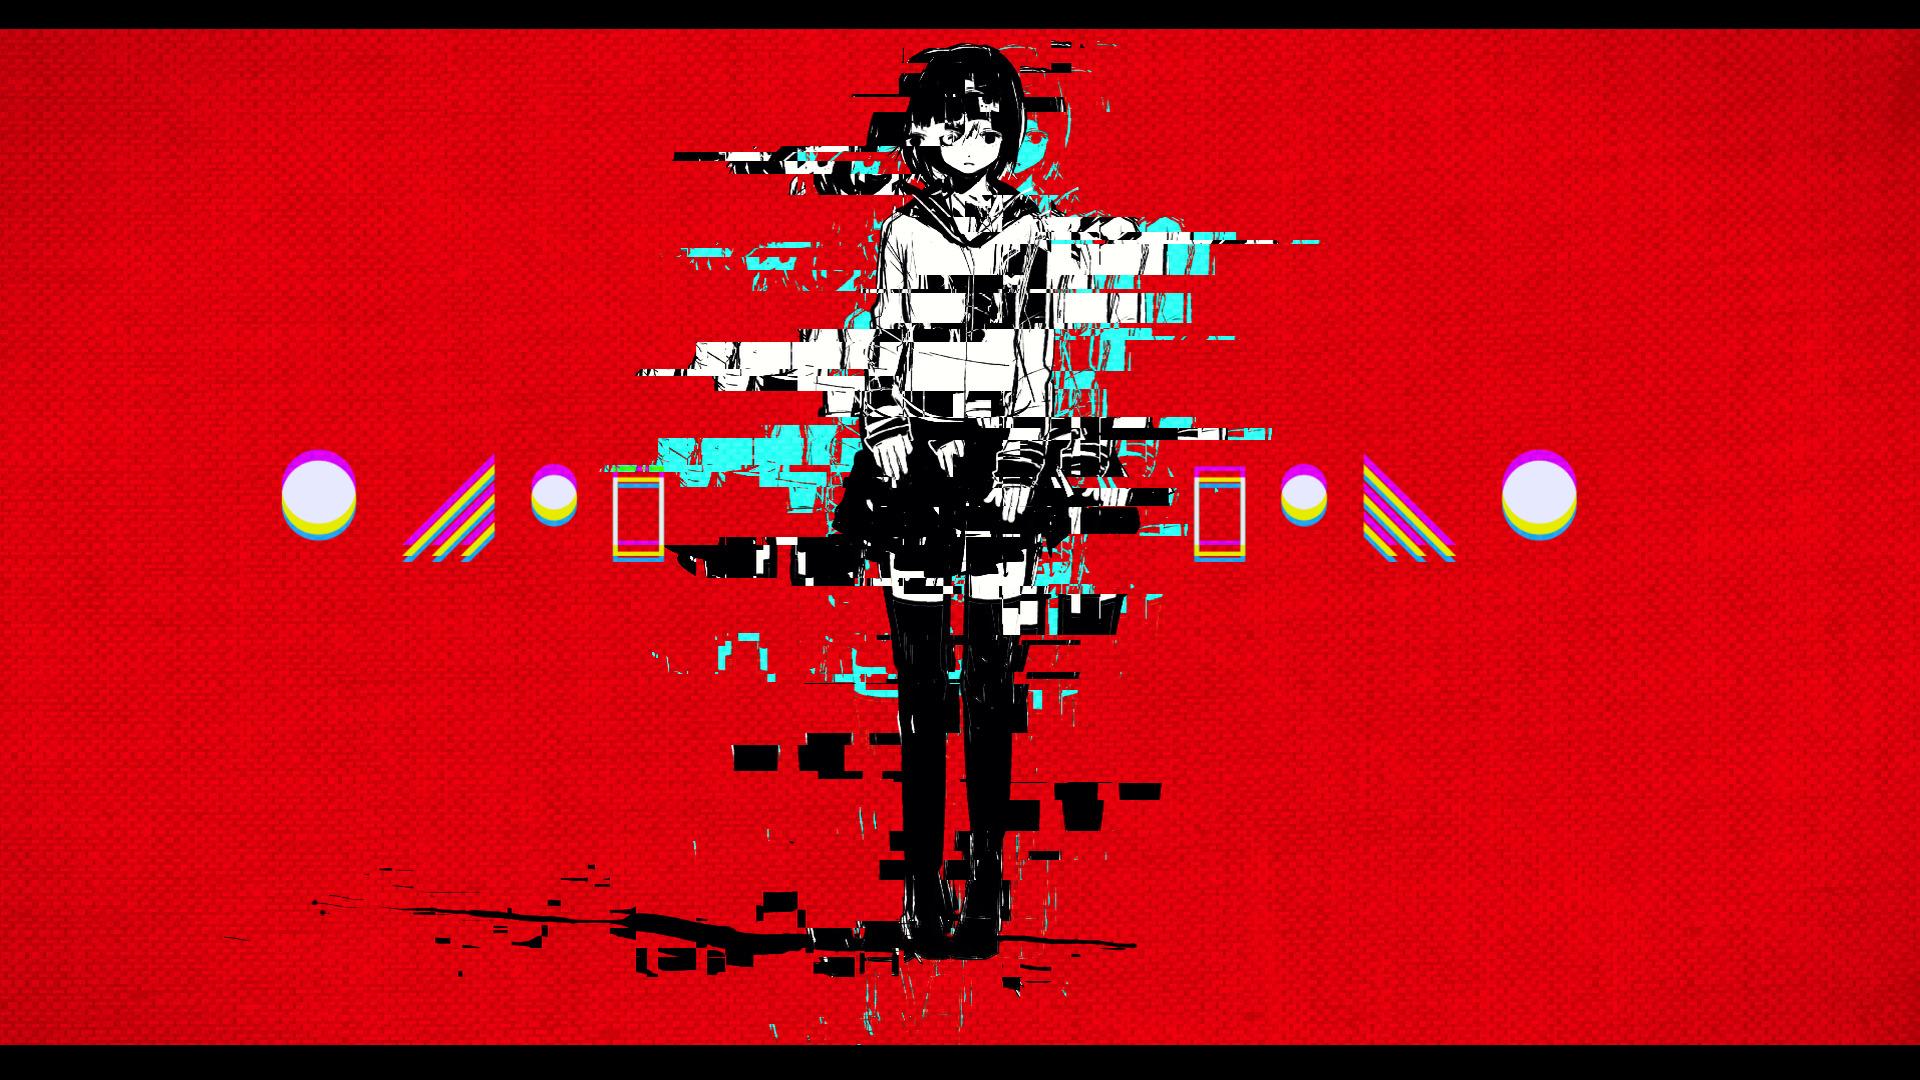 Wallpaper ID: 104933 / anime, anime girls, glitch art, picture-in-picture  Wallpaper